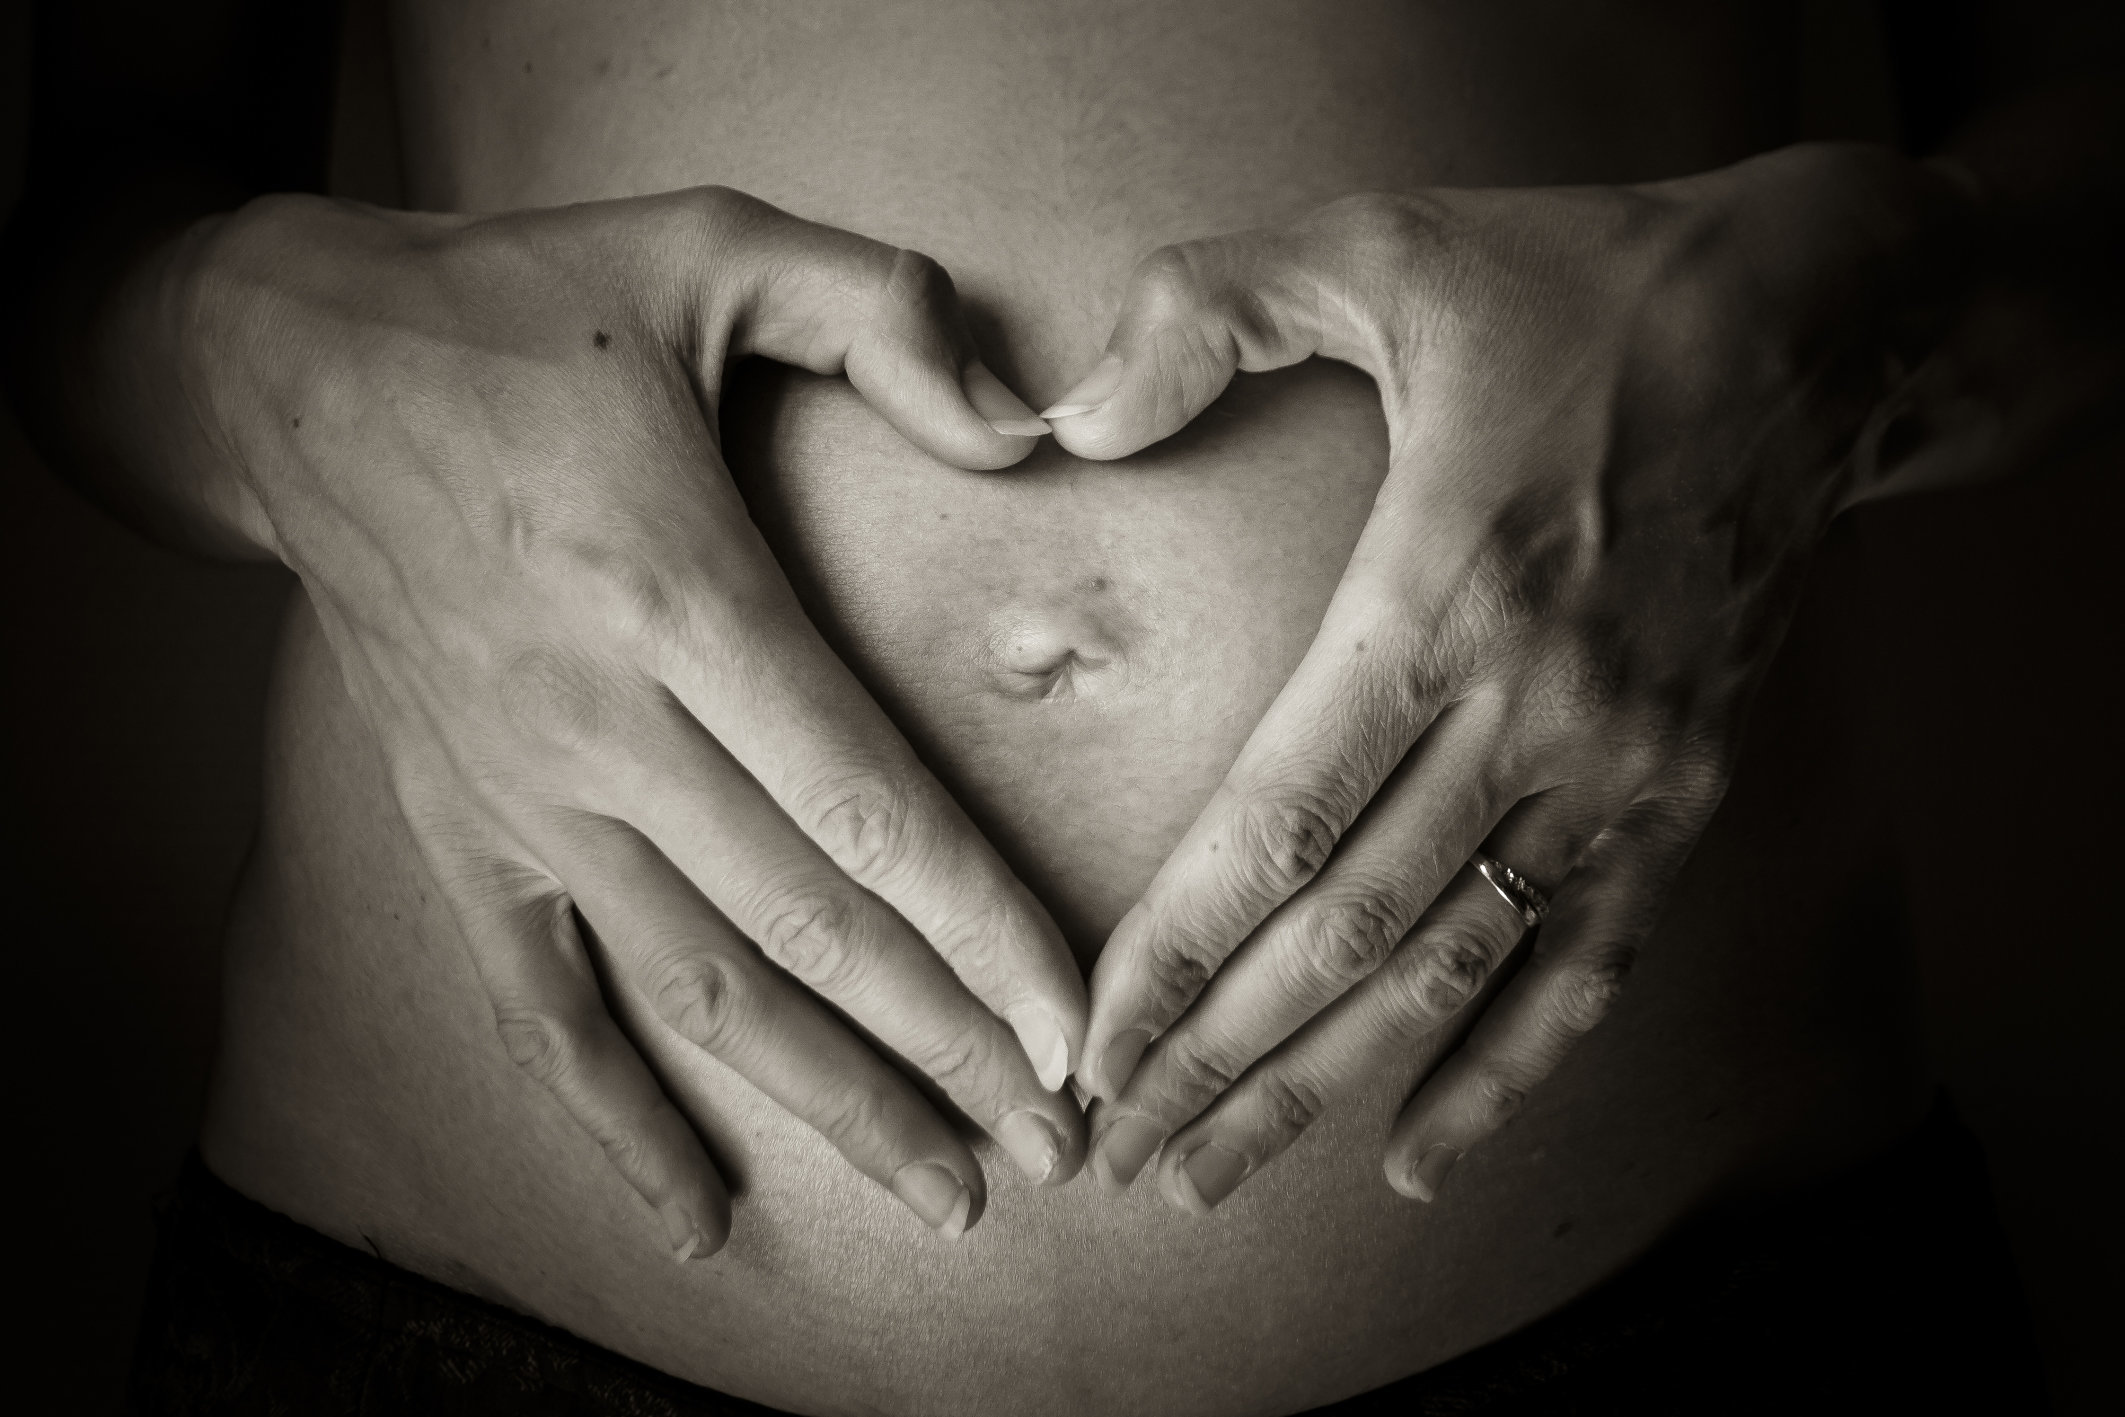 Midwife Explains The Spiritual Side Of Birth HuffPost Religion picture